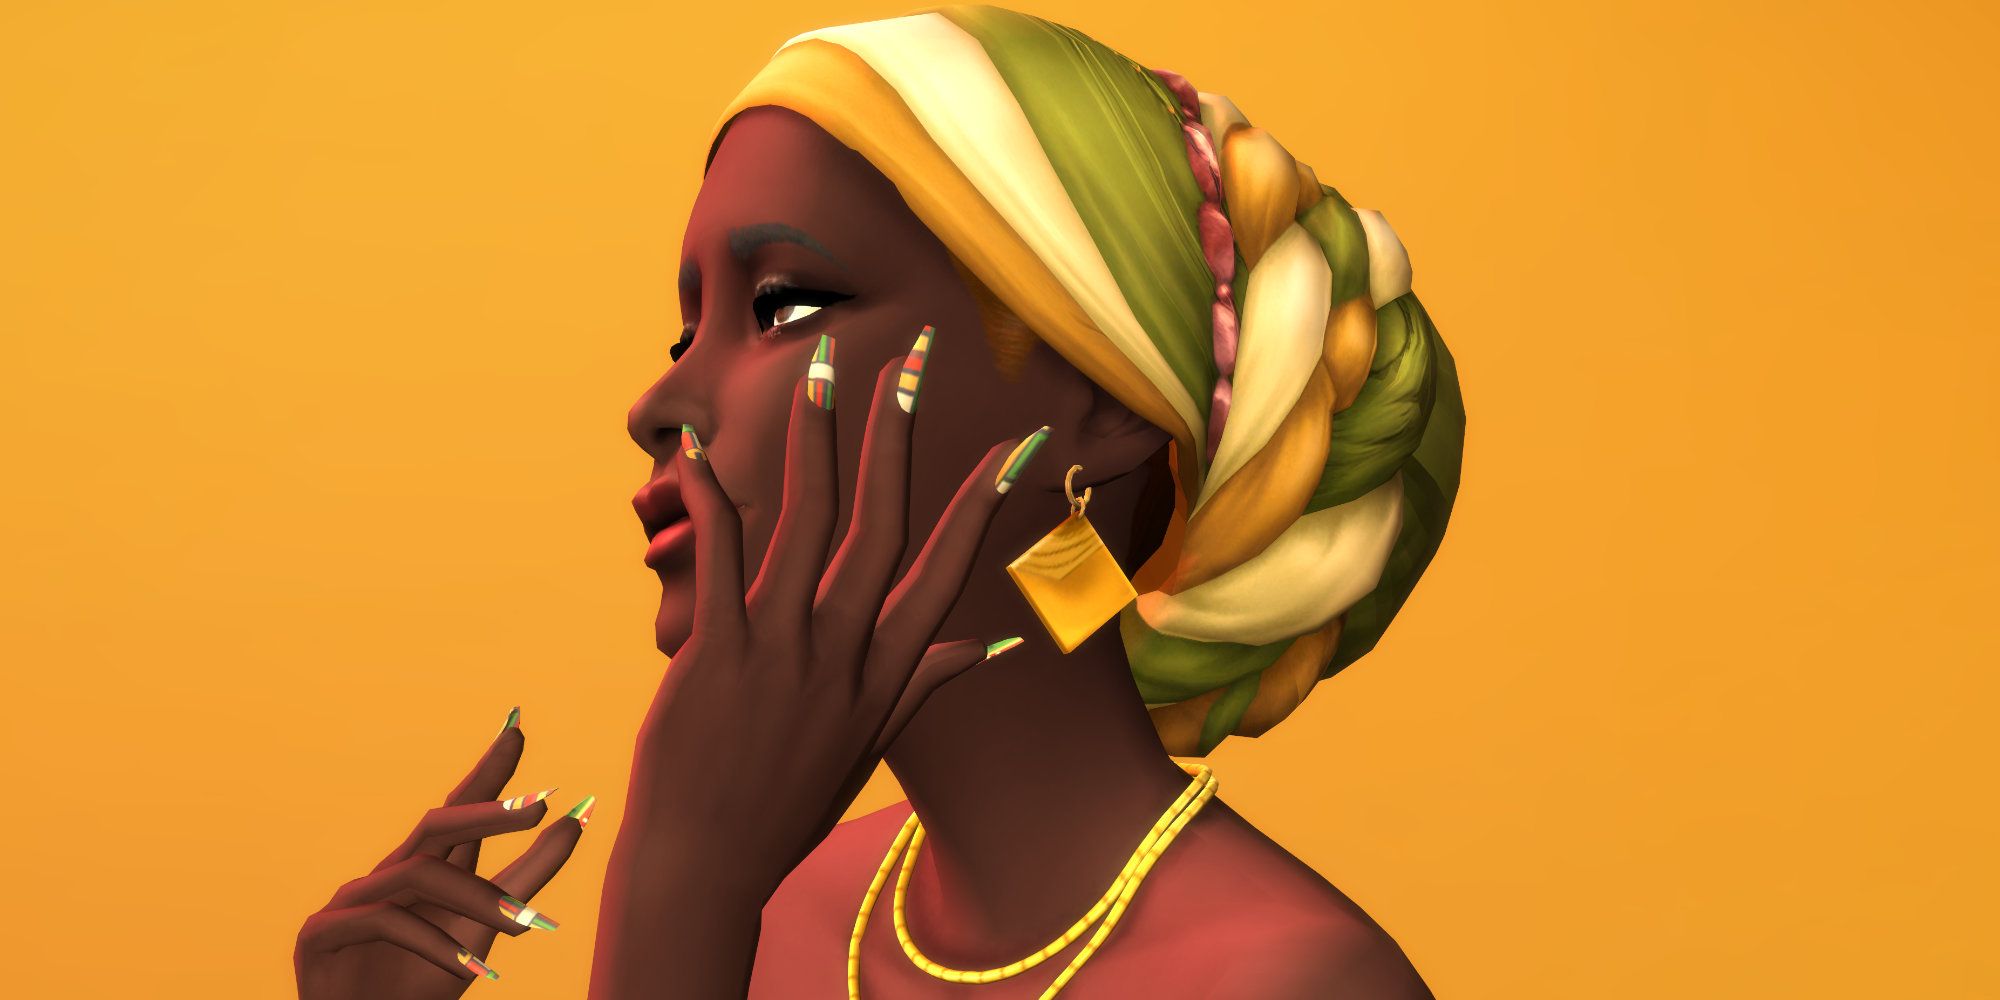 The Sims 4''s Spa Day expansion pack gets huge free content update